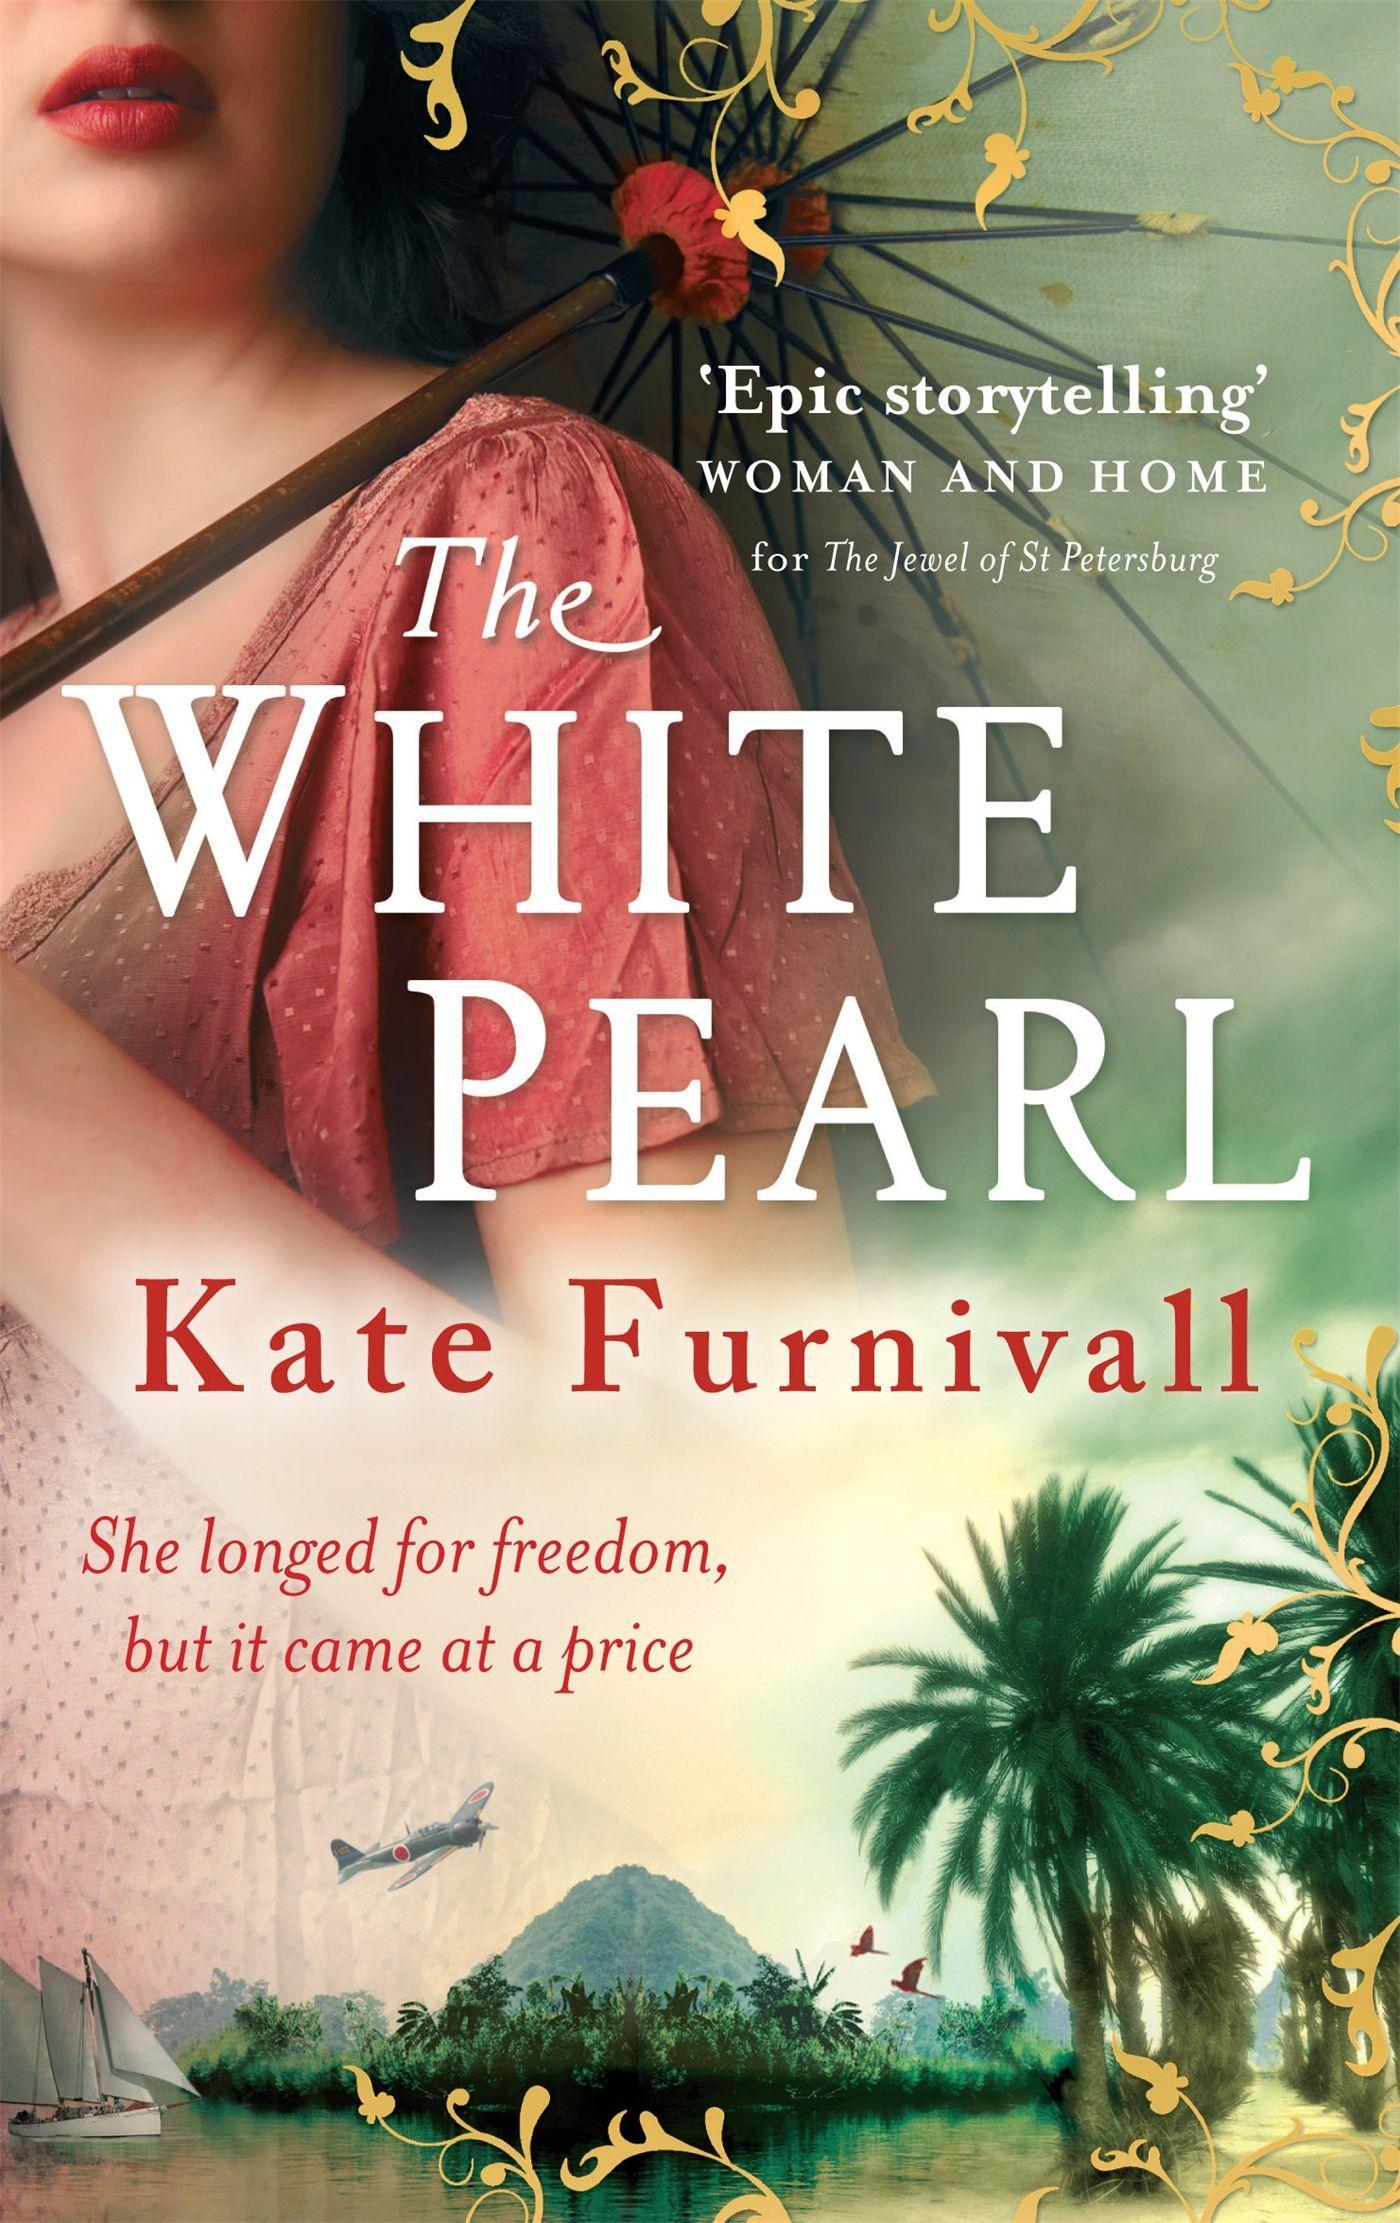 The White Pearl / 'Epic storytelling' Woman & Home / Kate Furnivall / Taschenbuch / 480 S. / Englisch / 2012 / Little, Brown Book Group / EAN 9780751543360 - Furnivall, Kate